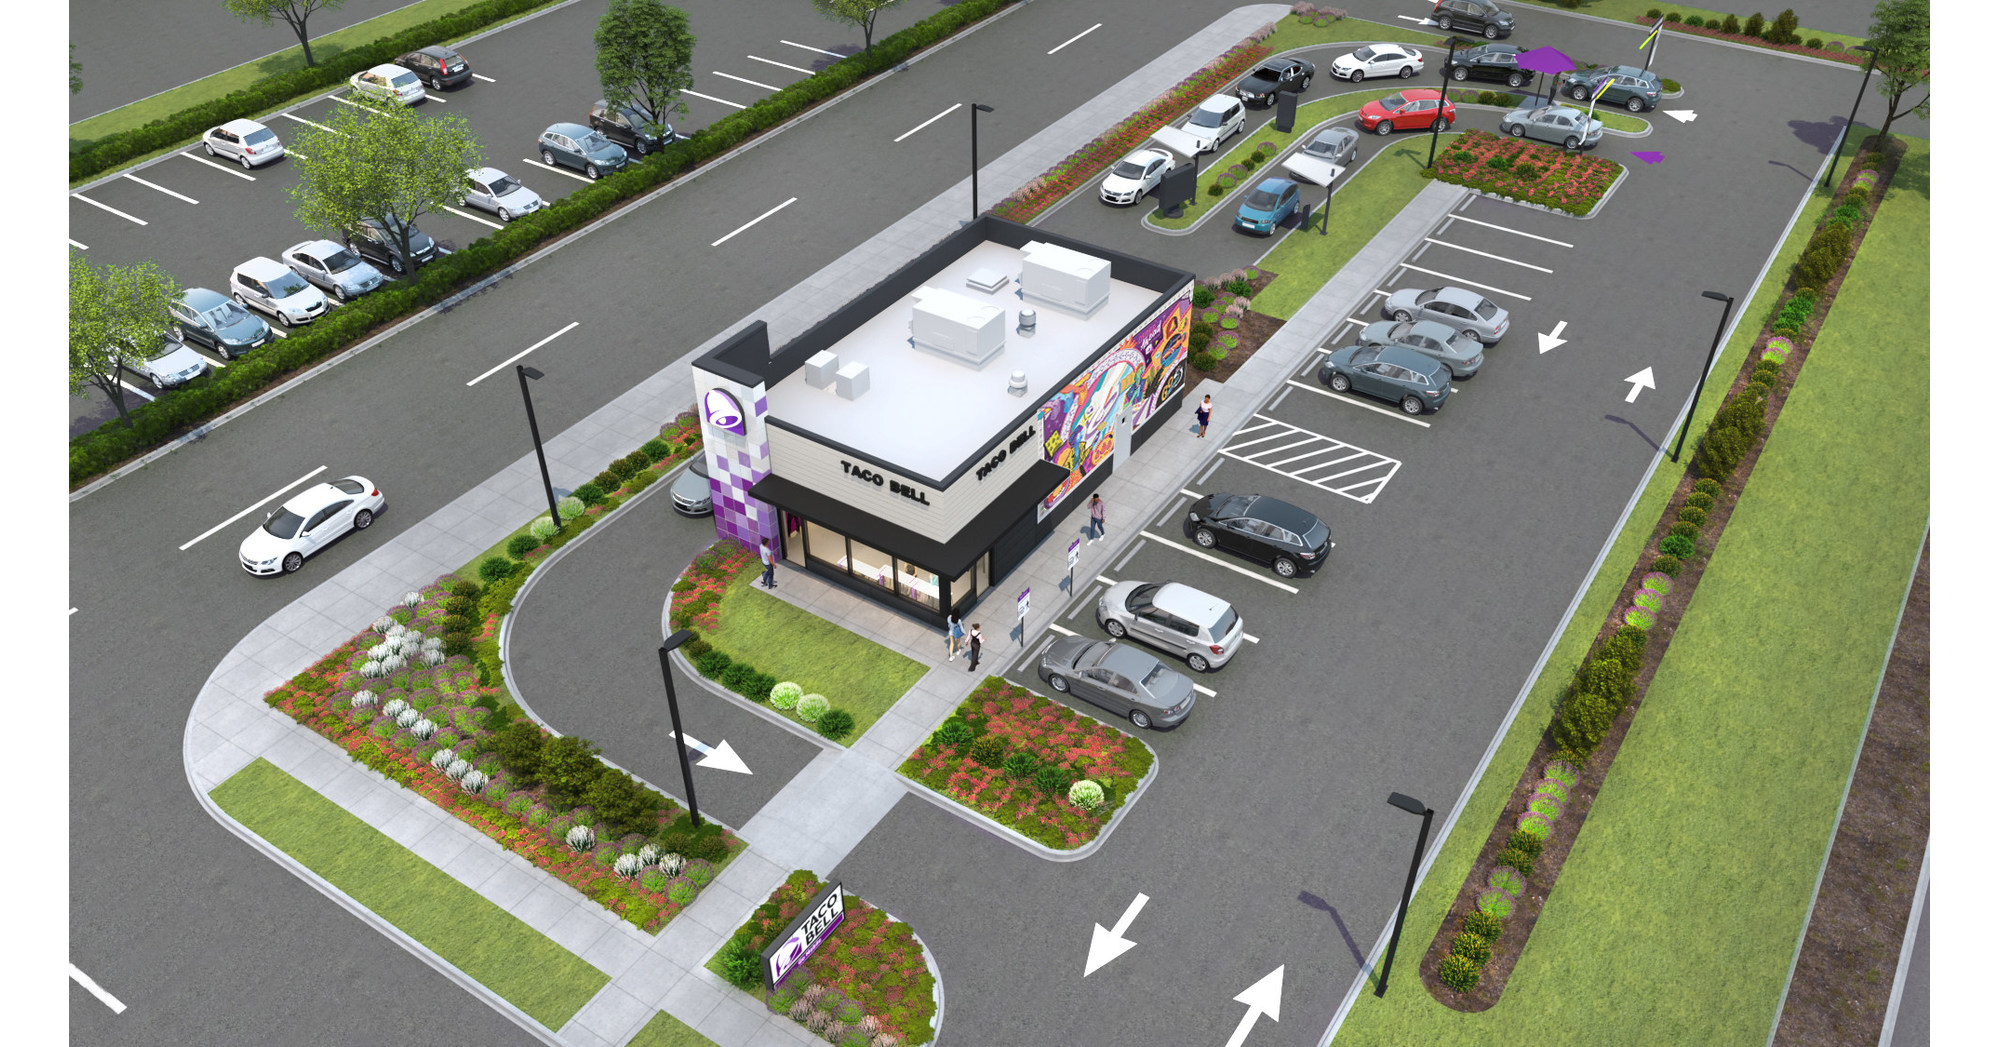 Taco Bell Has the Fastest Drive-Thru, According to New Research